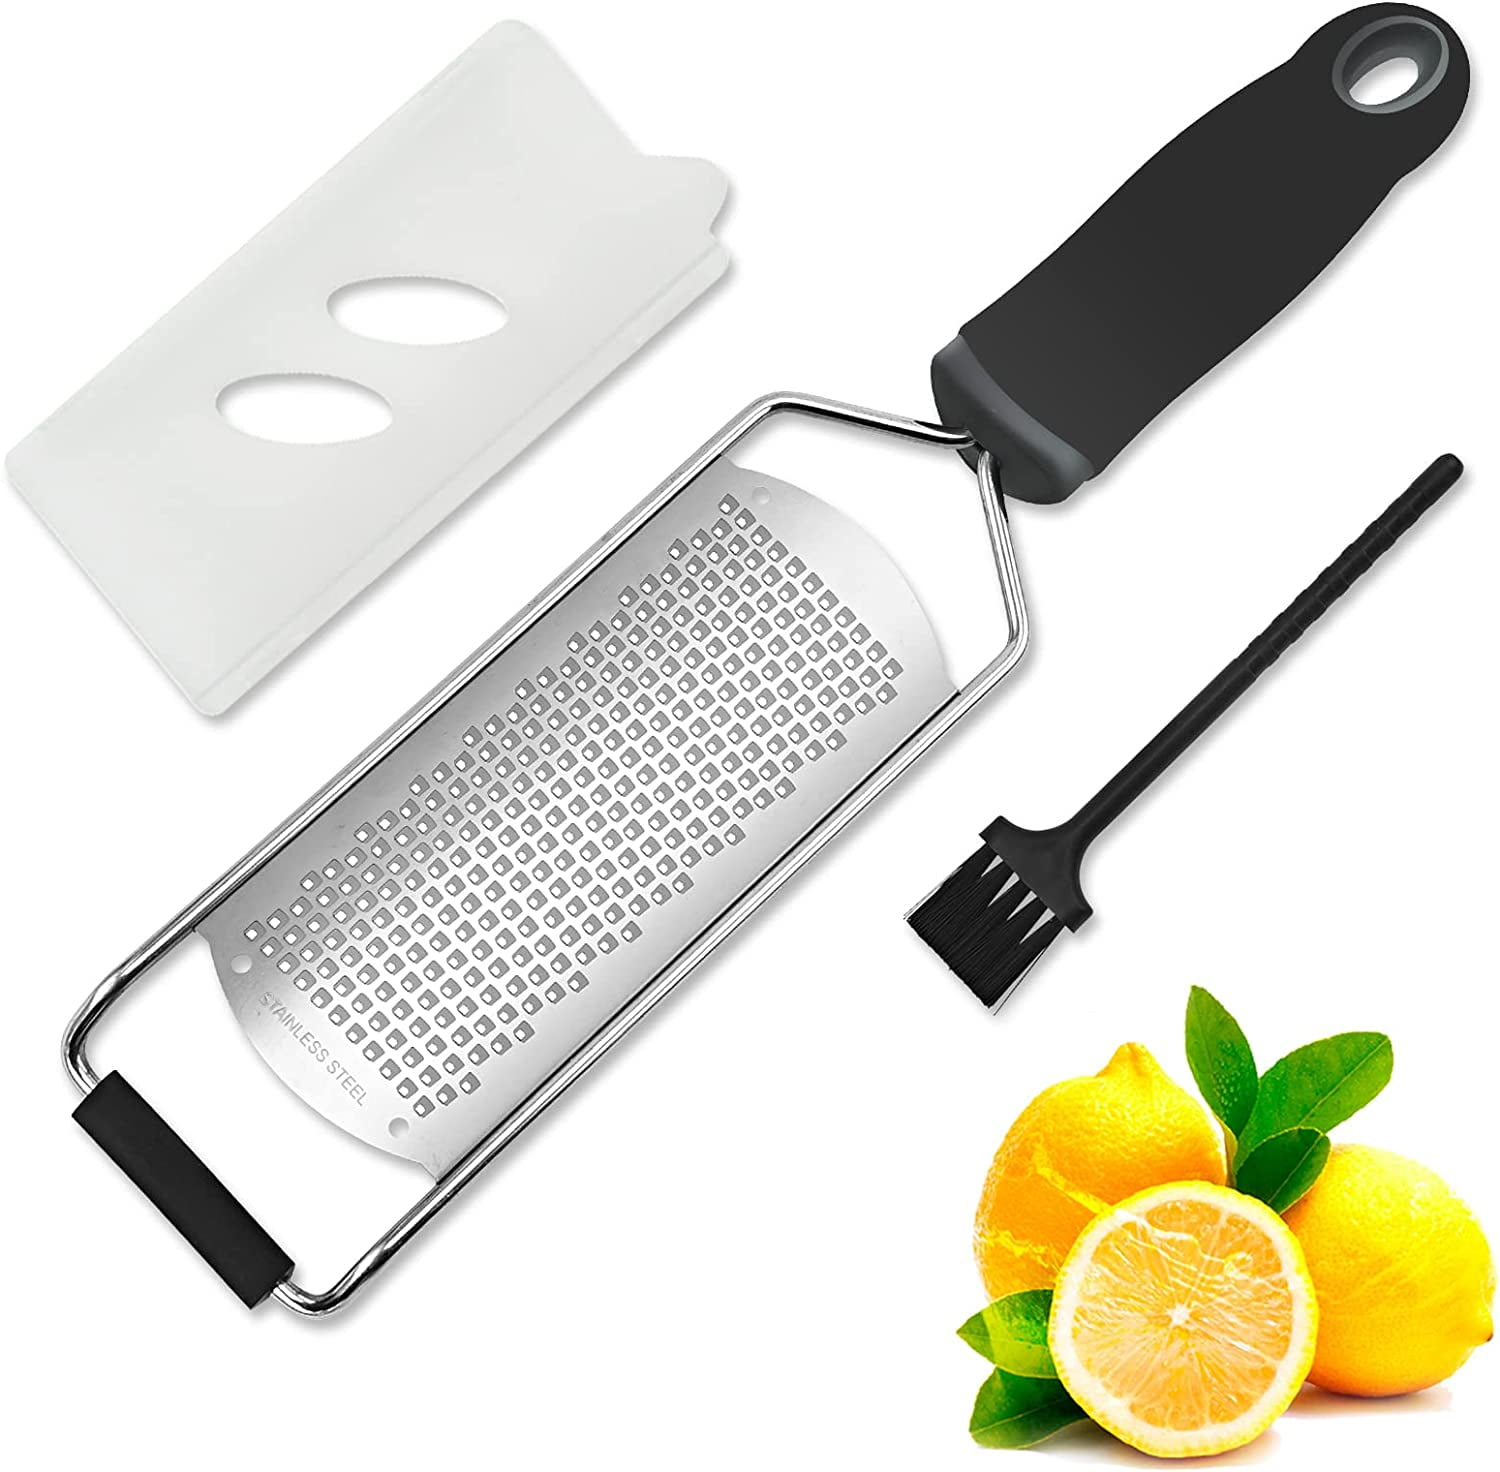 YQ Handheld Cheese Grater Flat,Mini Stainless Steel Cheese Zester  Grater,Kitchen Tools for Cheese, Chocolate, Spices, Ginger, Citrus Lemon  Zester